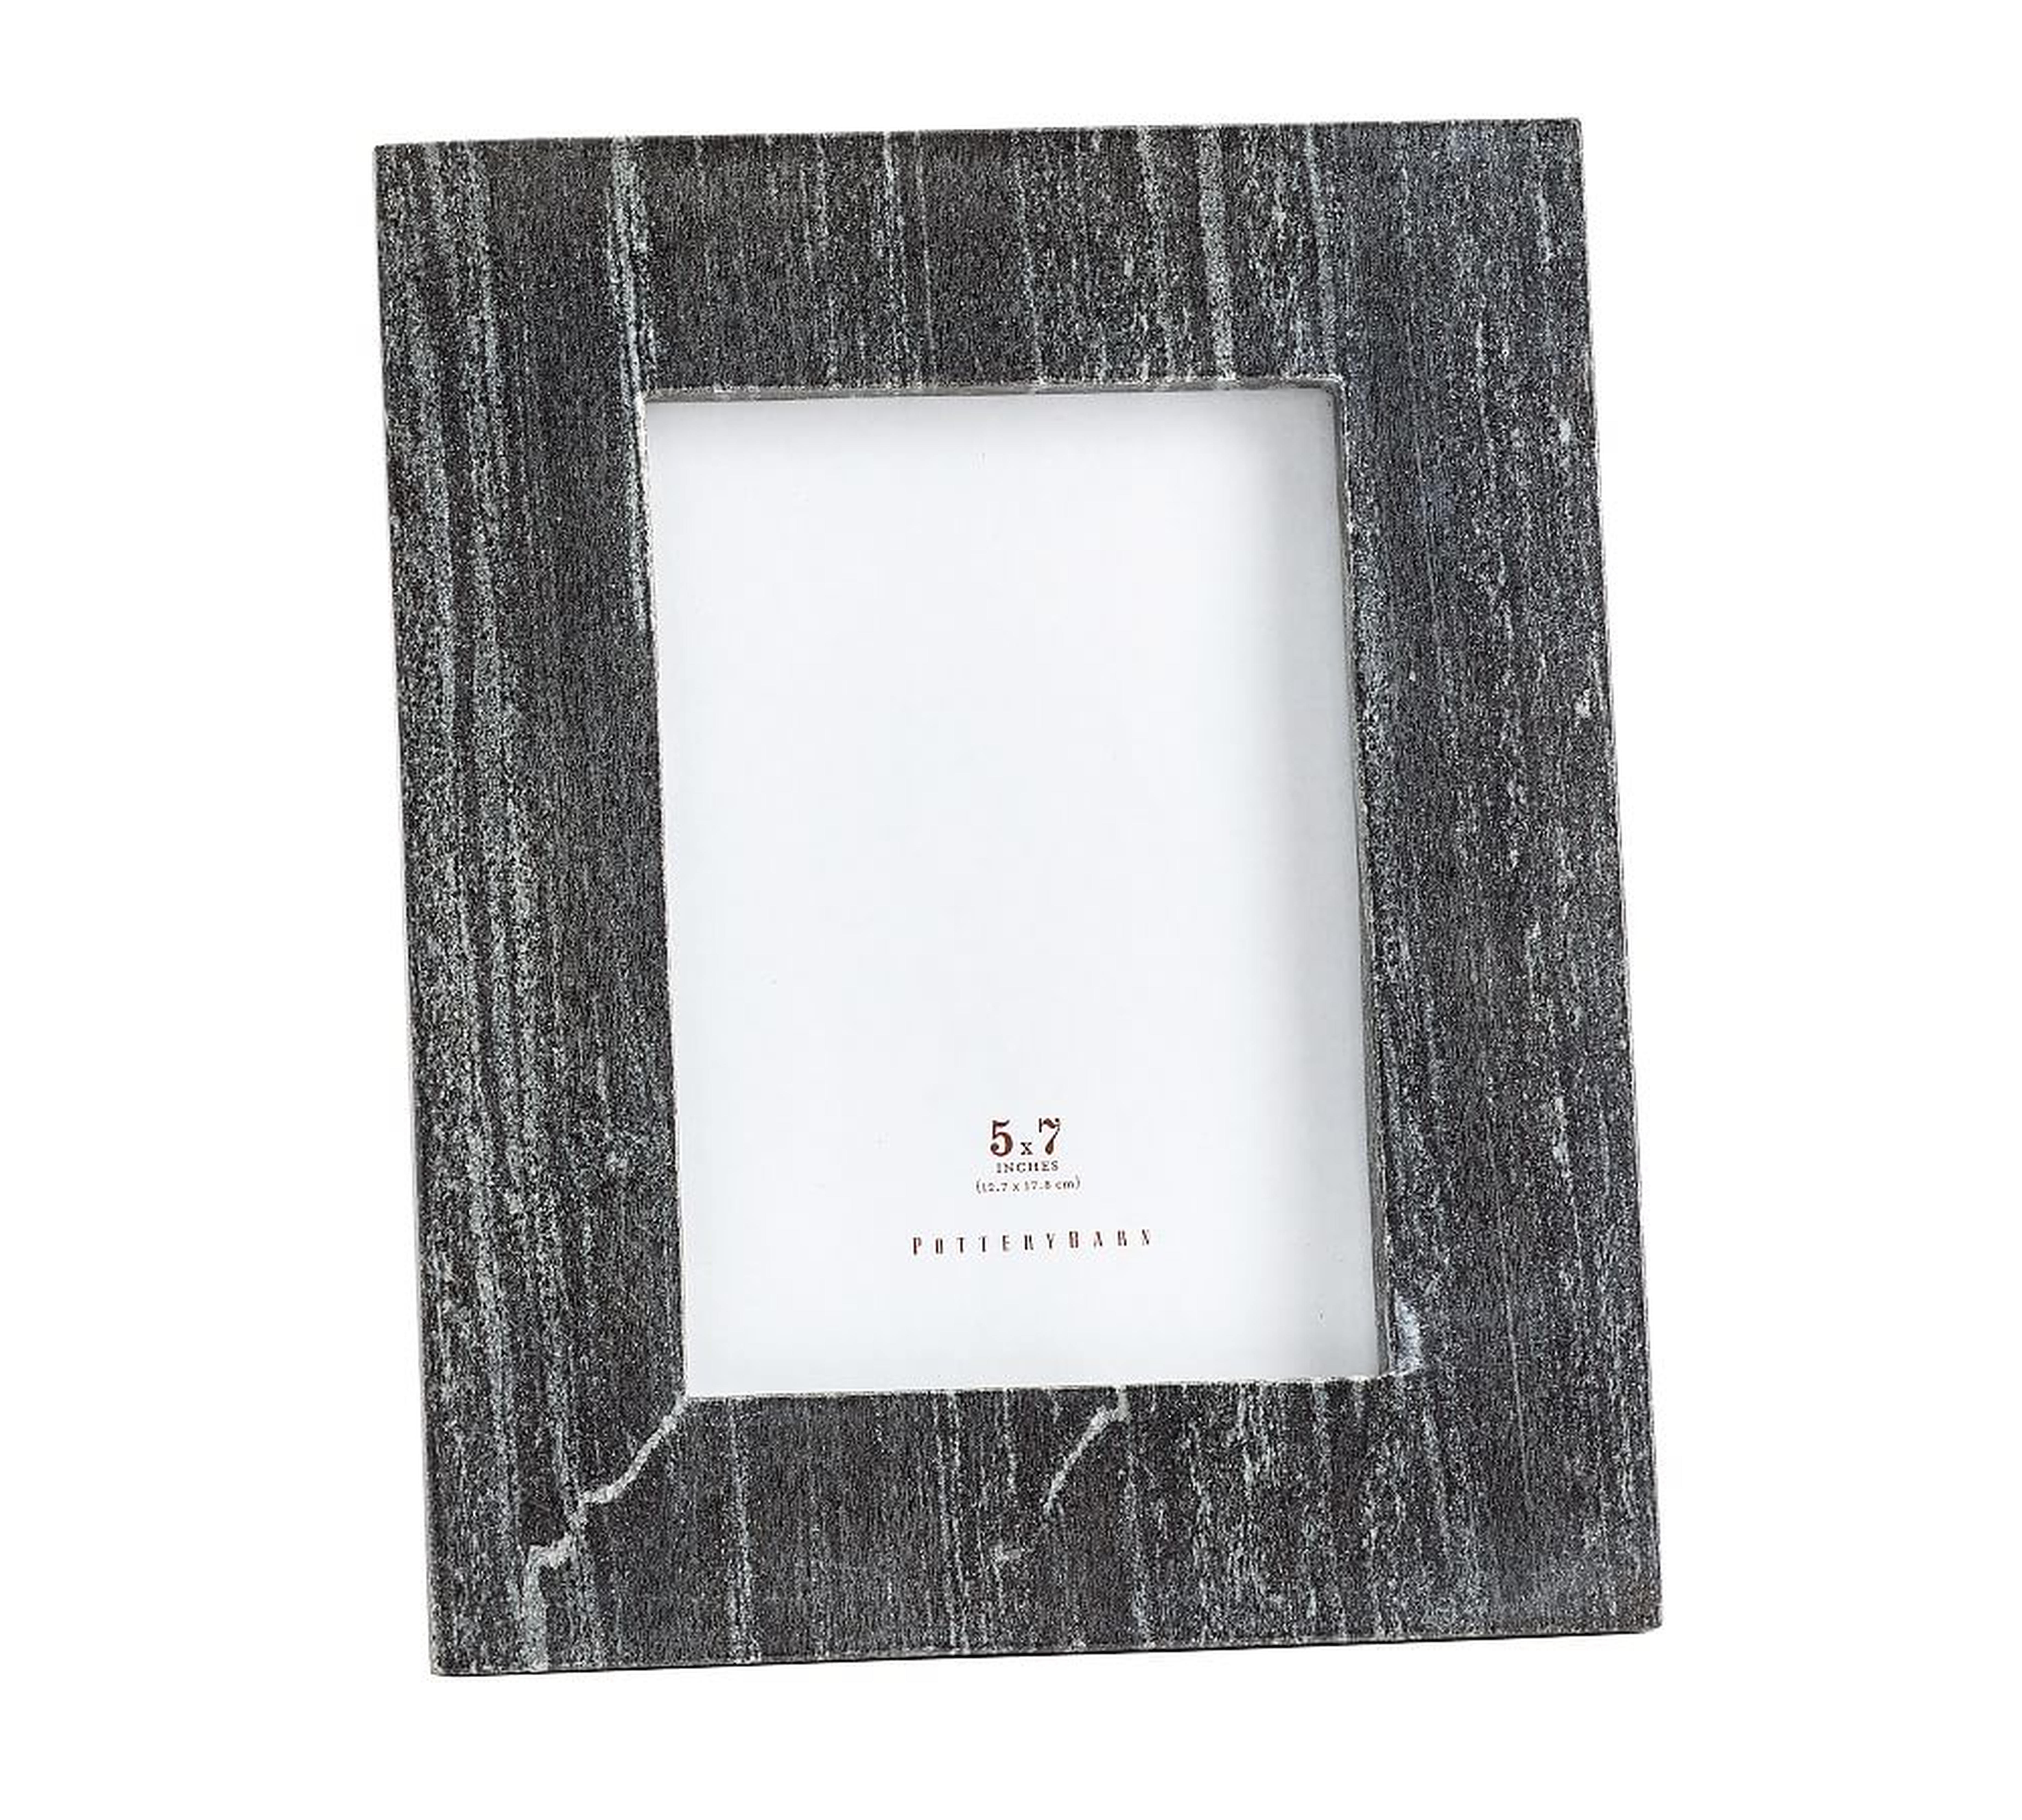 Marble Picture Frame, Black, 5" x 7" - Pottery Barn